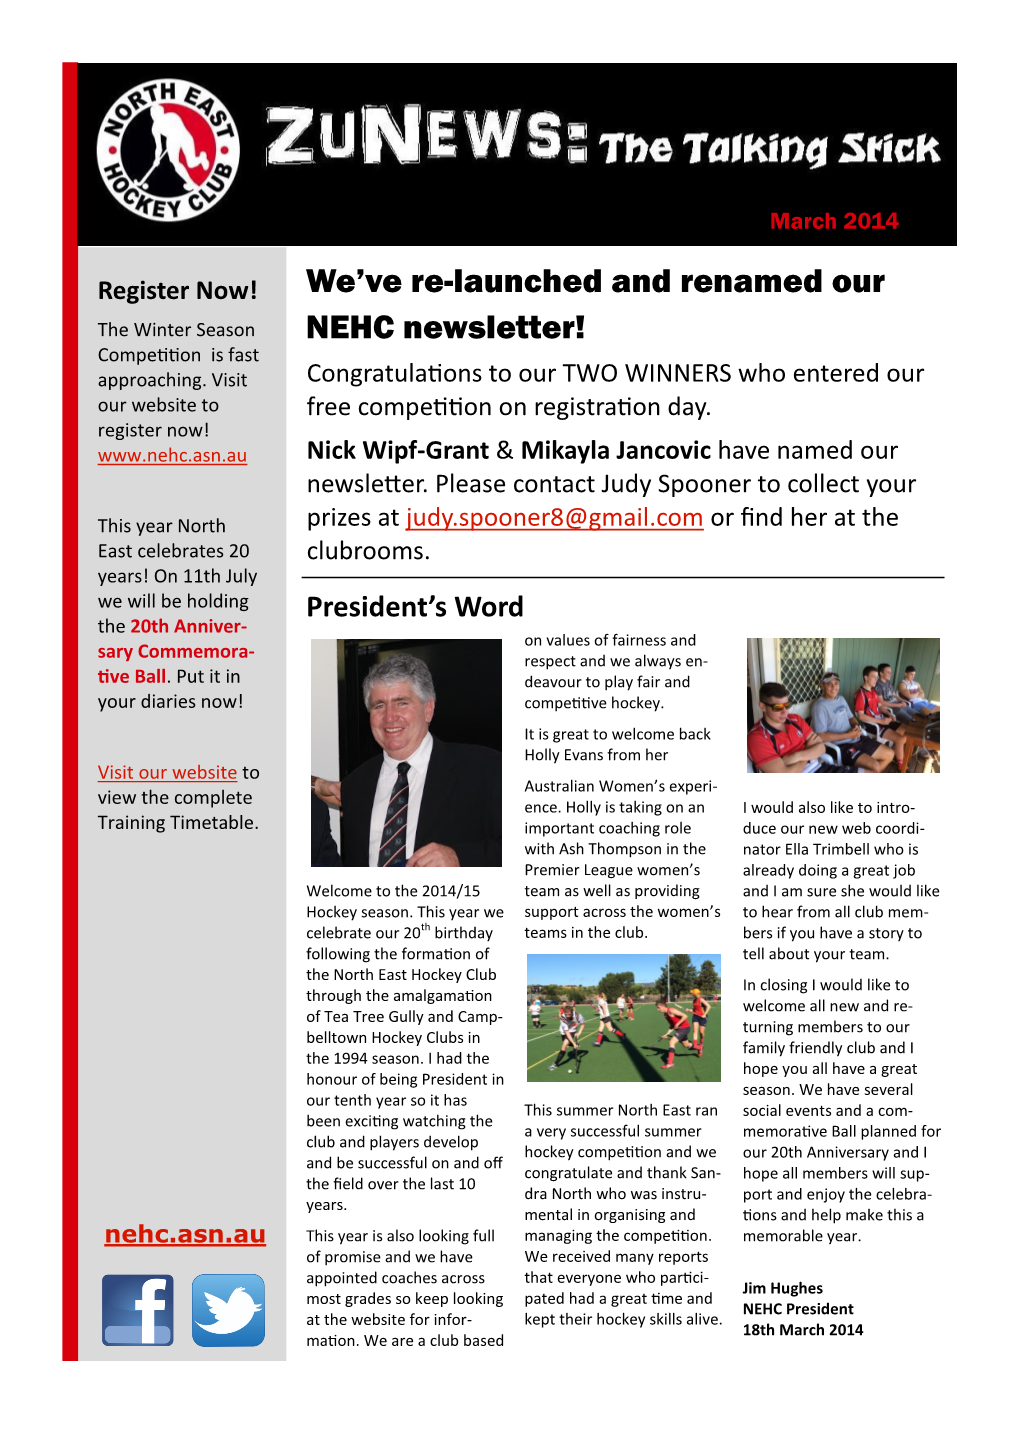 We've Re-Launched and Renamed Our NEHC Newsletter!